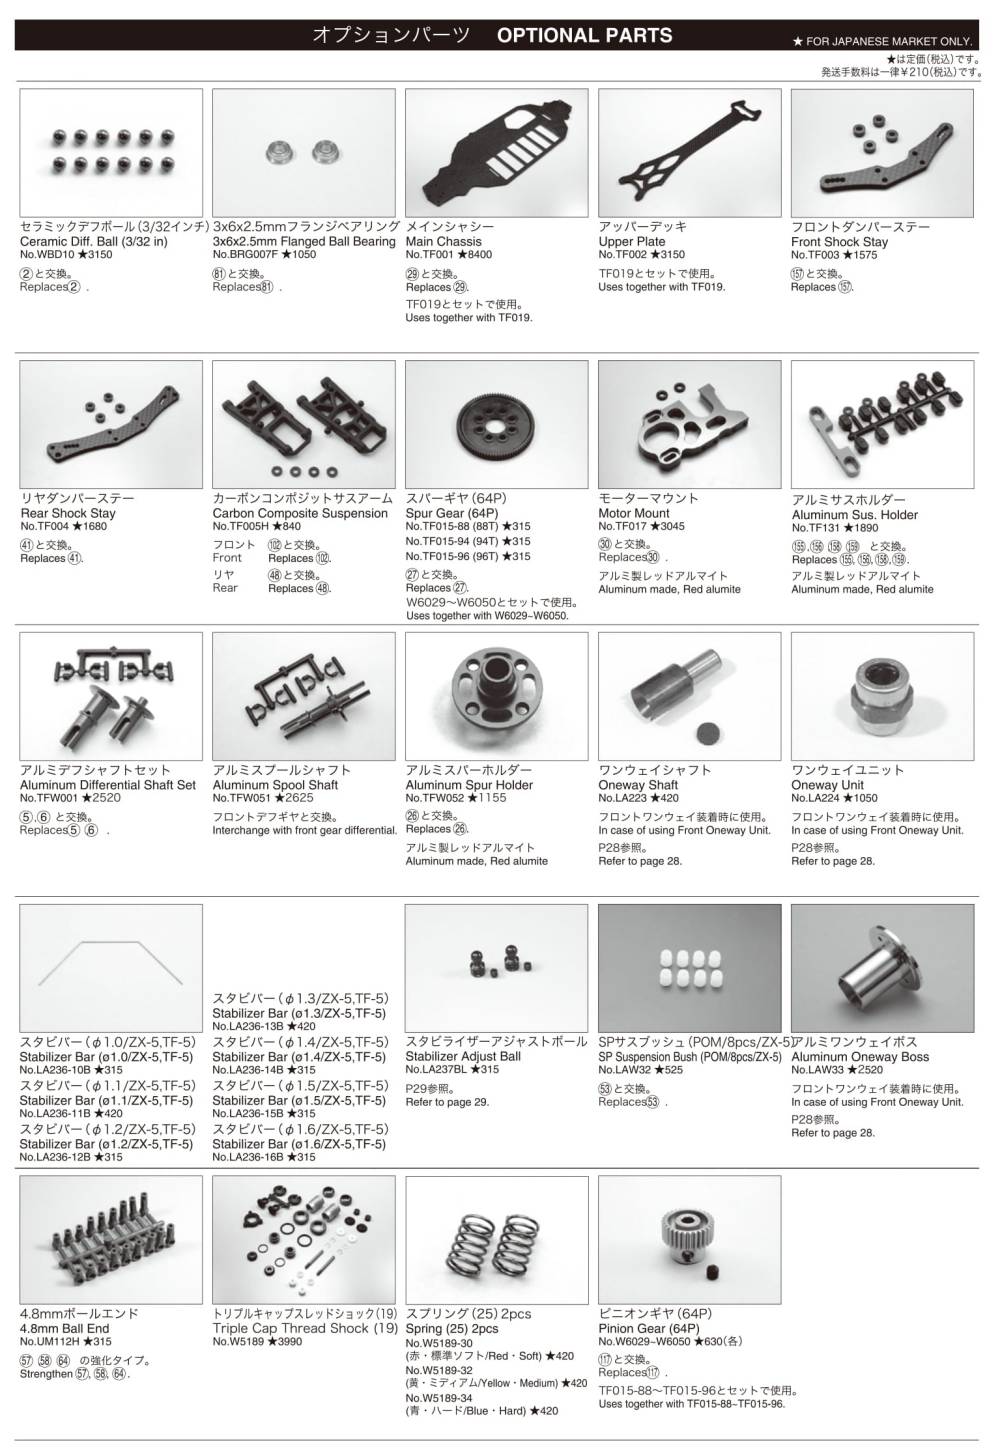 Kyosho TF-5S Chassis - Parts